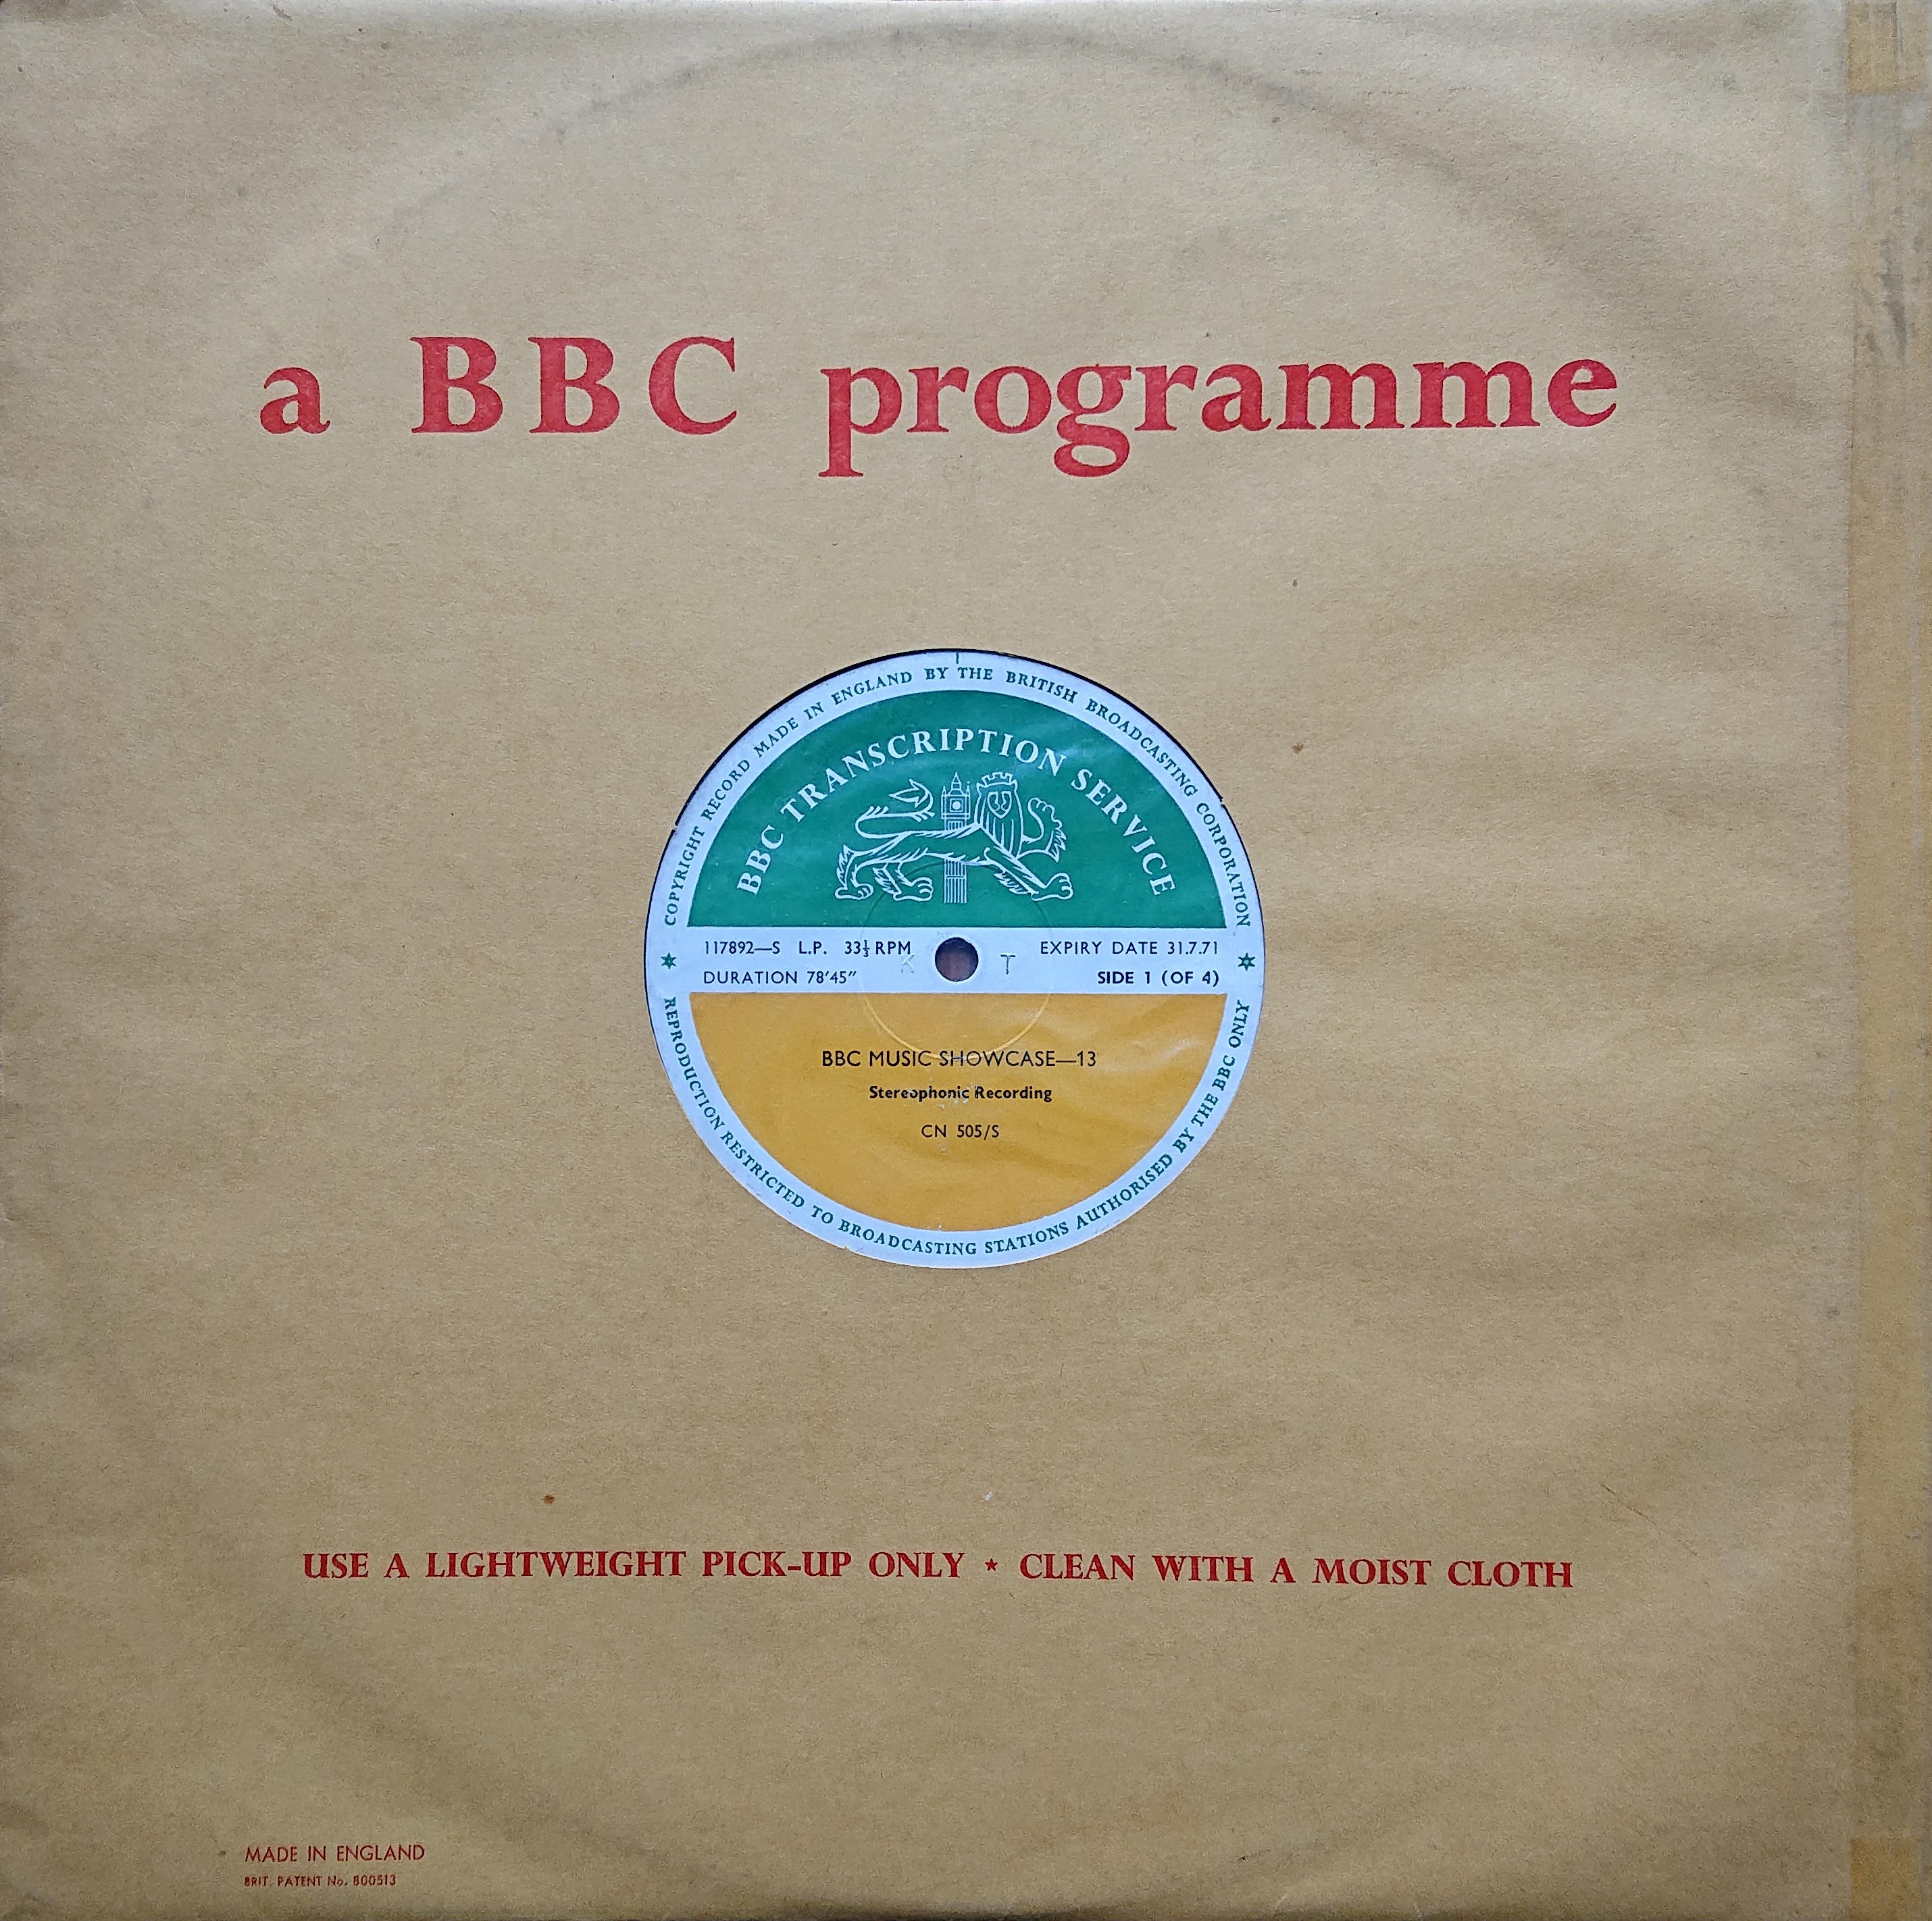 Picture of CN 505 S 25 BBC music showcase - 13 (Sides 1 & 3) by artist Various from the BBC records and Tapes library